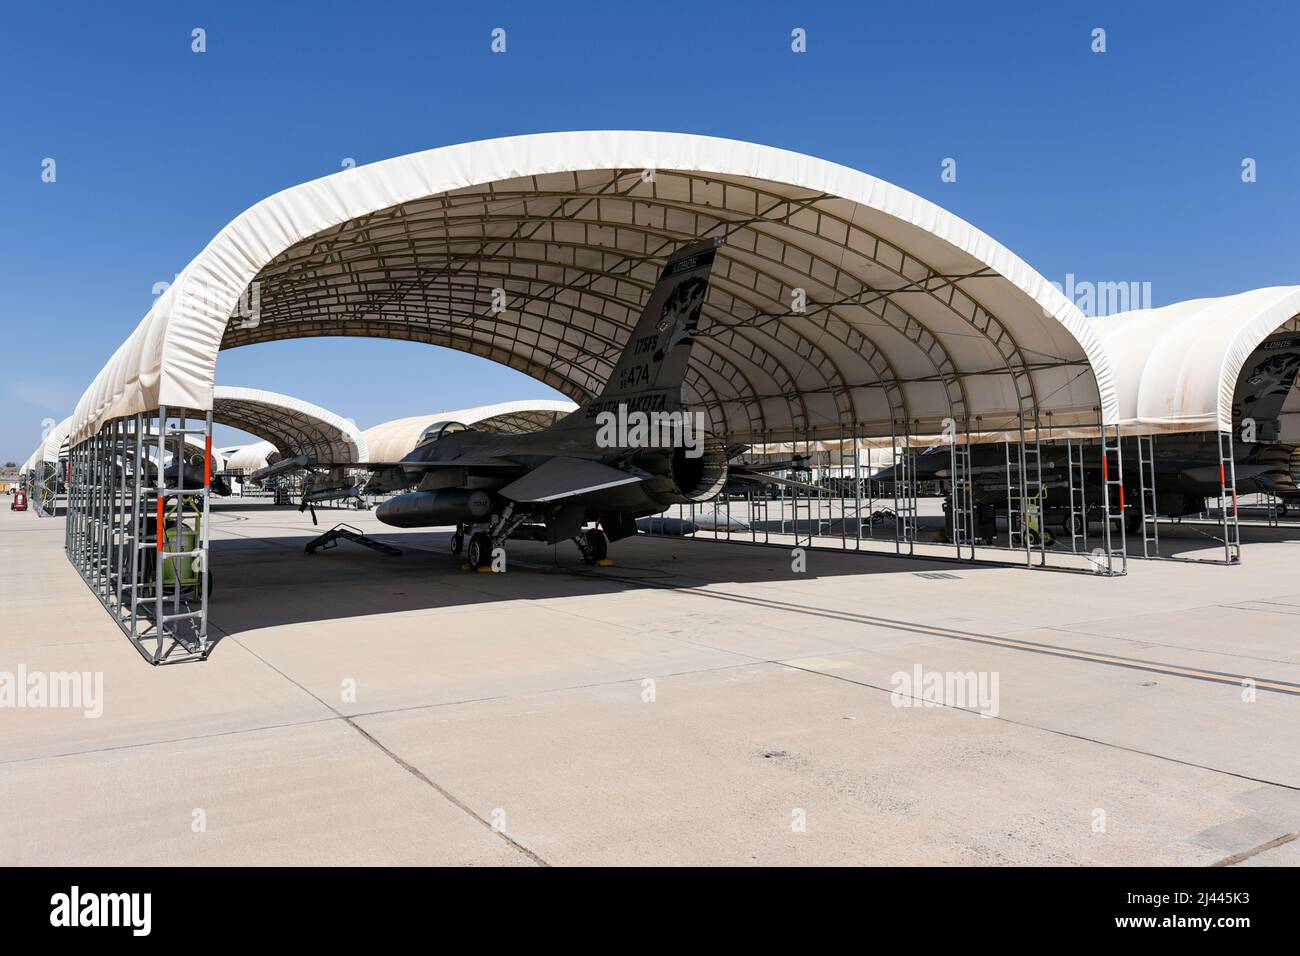 F-16 Fighting Falcons assigned to the 114th Fighter Wing park under a sun shade during Weapons and Tactics Instructor (WTI) course 2-22 at Marine Corps Air Station Yuma, Ariz., April 4, 2022. WTI is a seven-week training event hosted by Marine Aviation Weapons and Tactics Squadron One (MAWTS-1), providing standardized advanced tactical training and certification of unit instructor qualifications to support Marine aviation training and readiness, and assists in developing and employing aviation weapons and tactics. (U.S. Air National Guard photo by Tech. Sgt. Jordan M. Hohenstein) Stock Photo